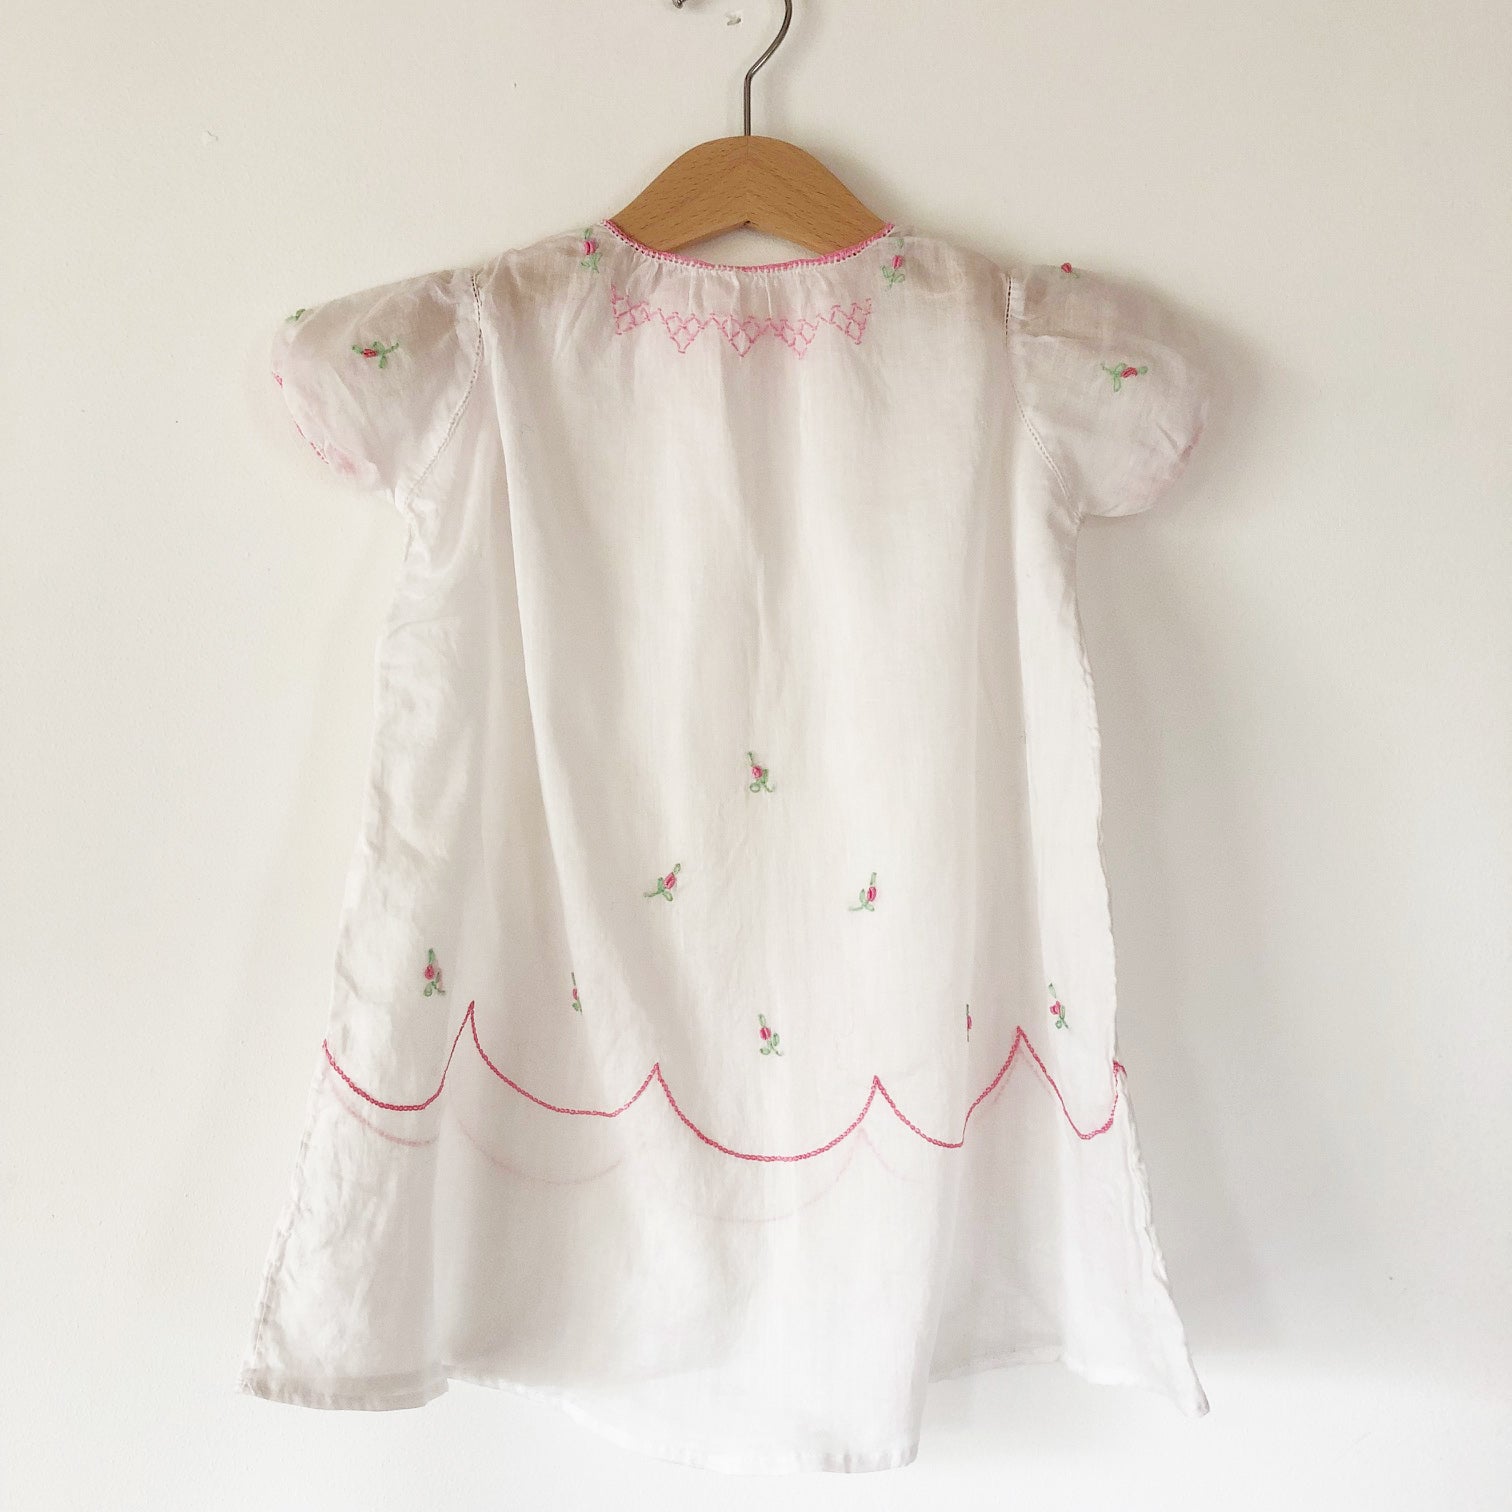 Baby Hand Embroidered Dress size 6-12 months